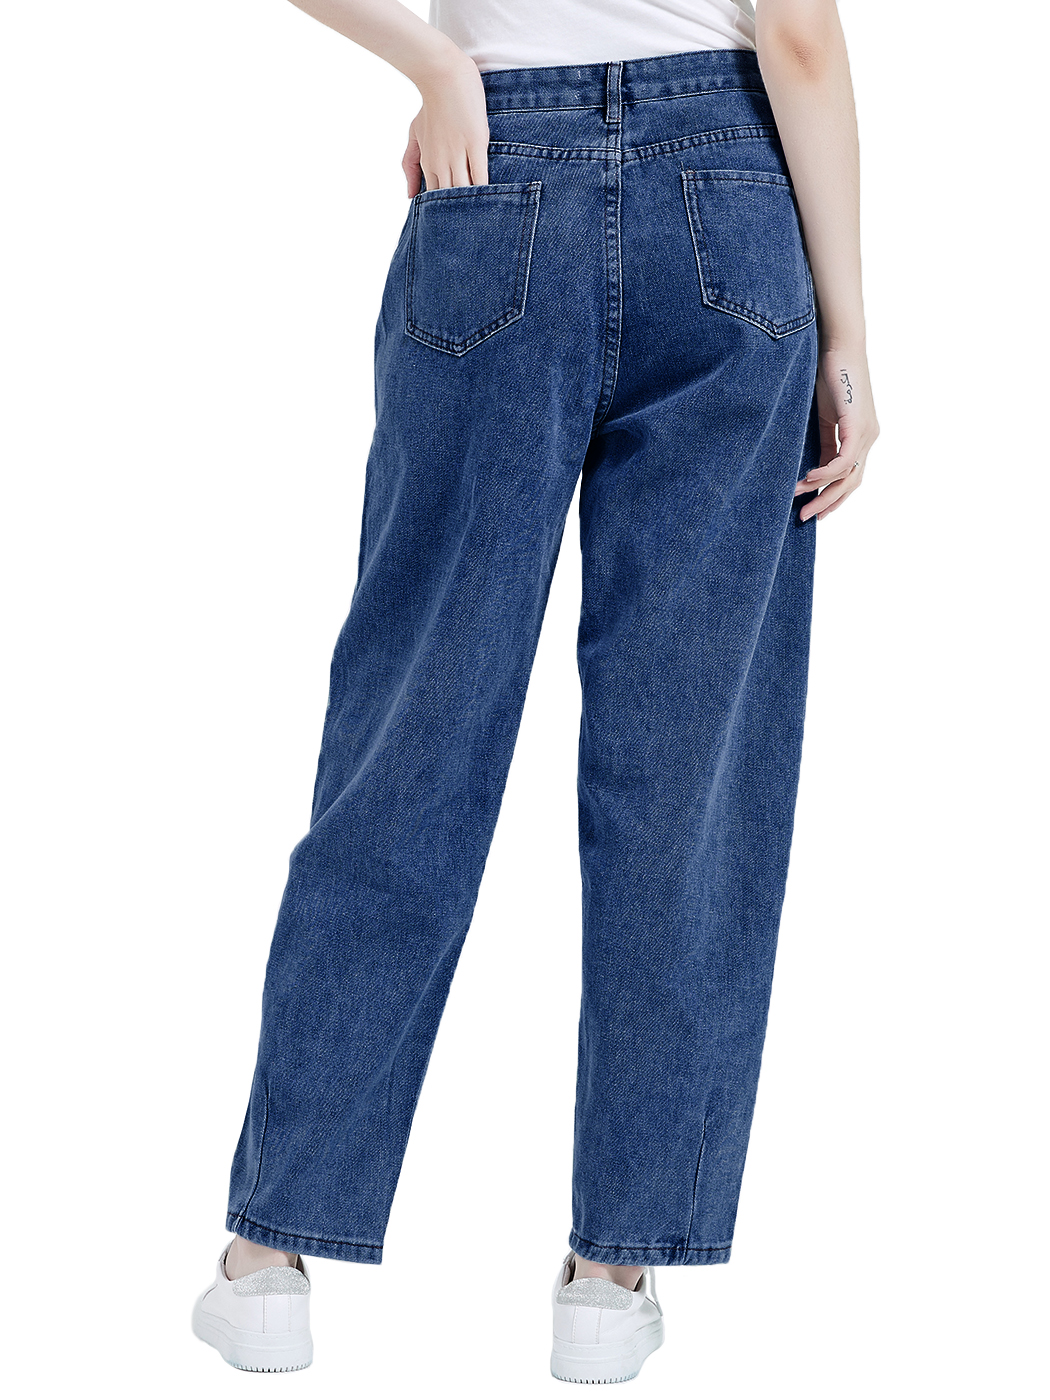 Women's Classic High Waisted Boyfriend Cropped Denim Jeans Loose Harem Pants - image 2 of 7